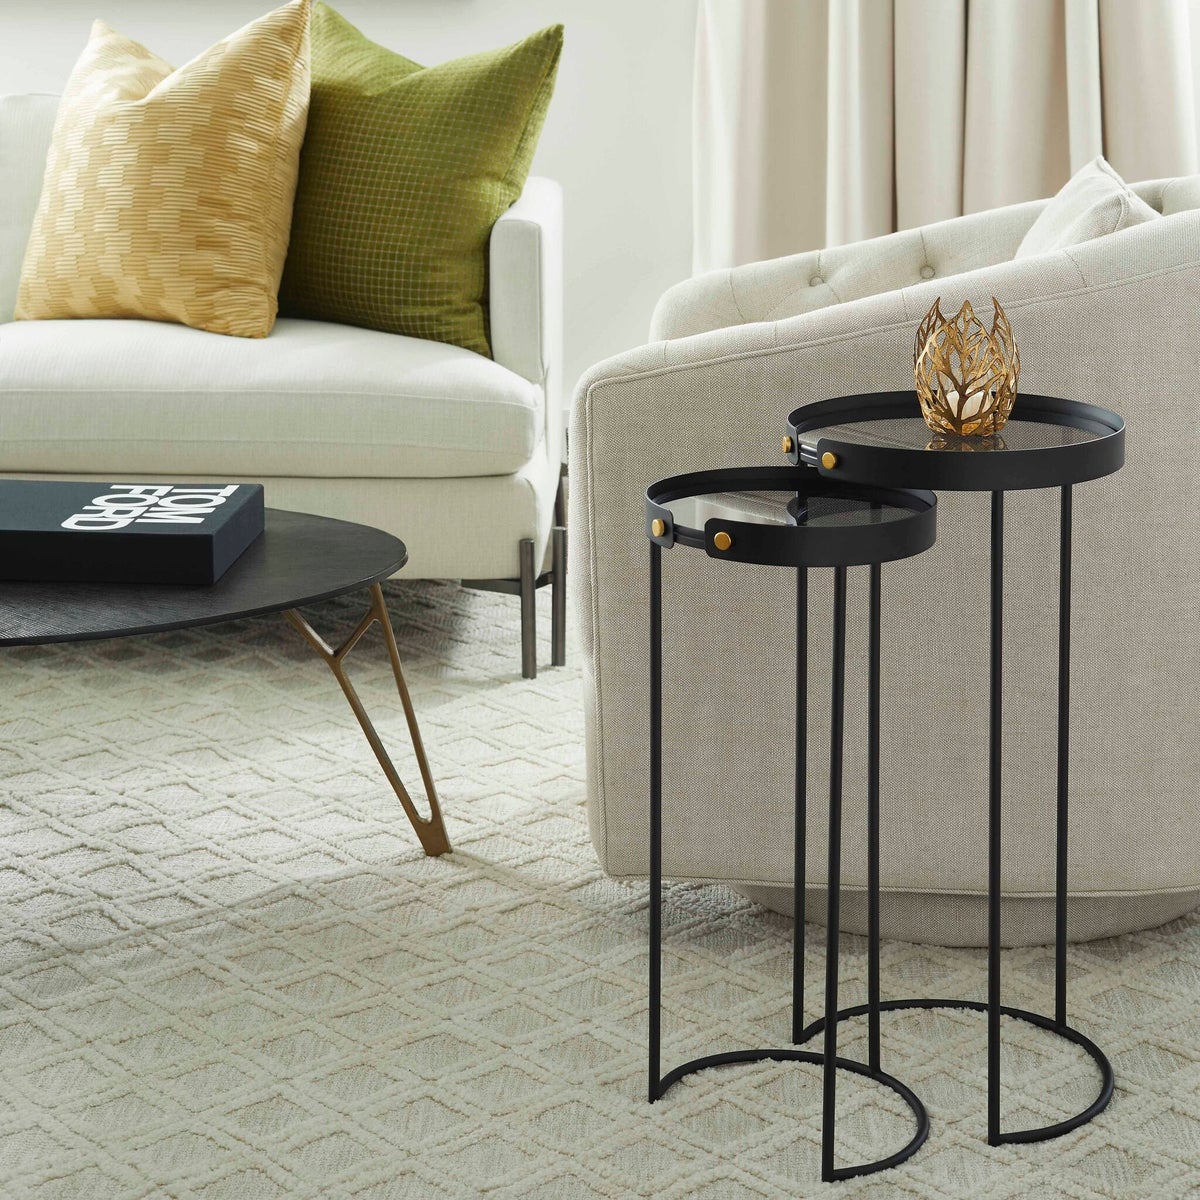 Graphite Tall Bow Tie Tables